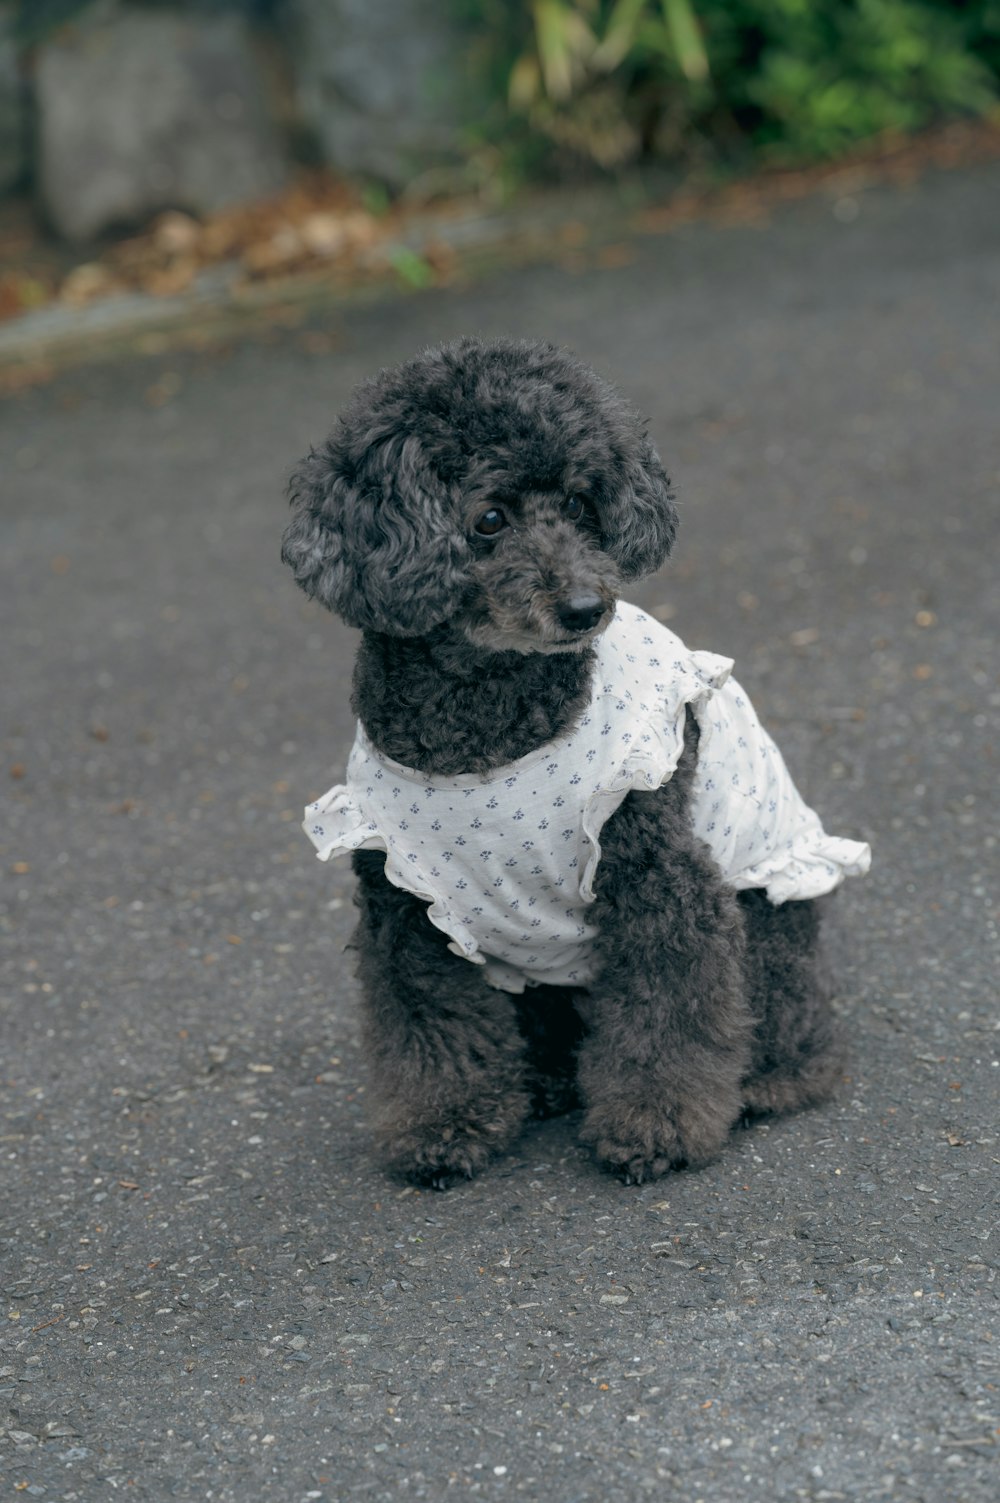 a small black poodle wearing a white shirt